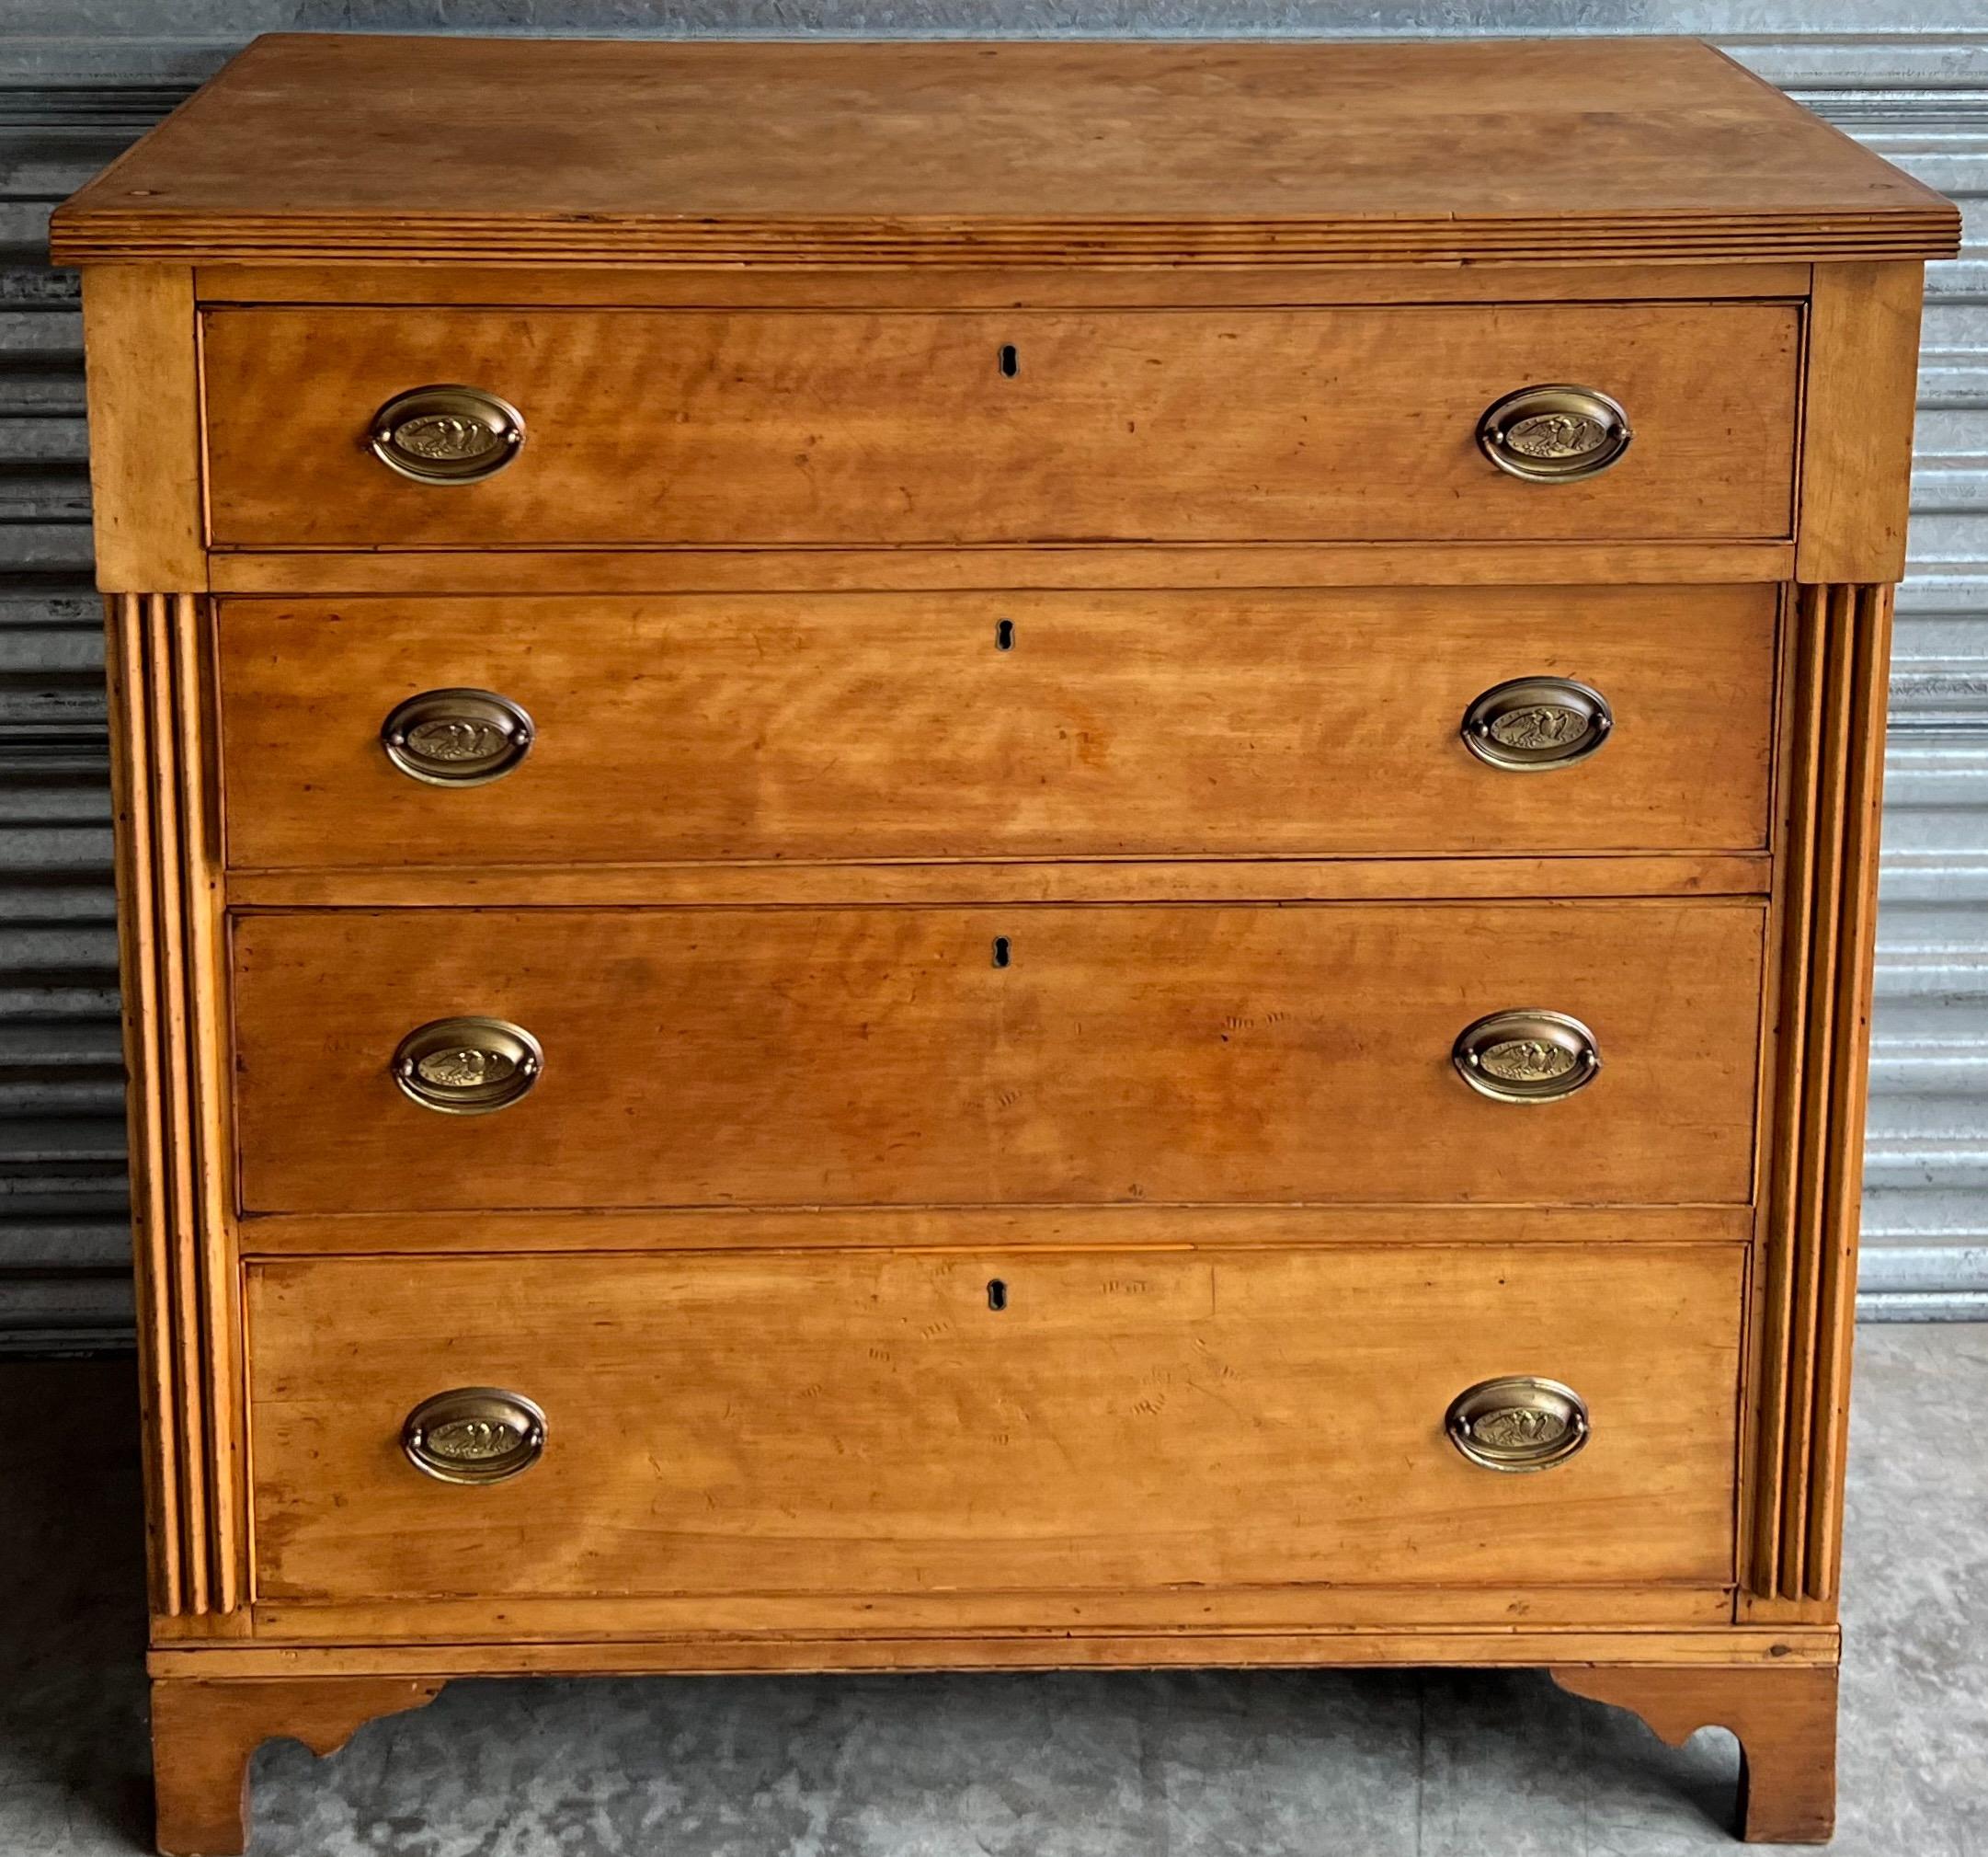 19th-C. American Federal Style Tiger Maple Chest or Commode In Good Condition For Sale In Kennesaw, GA